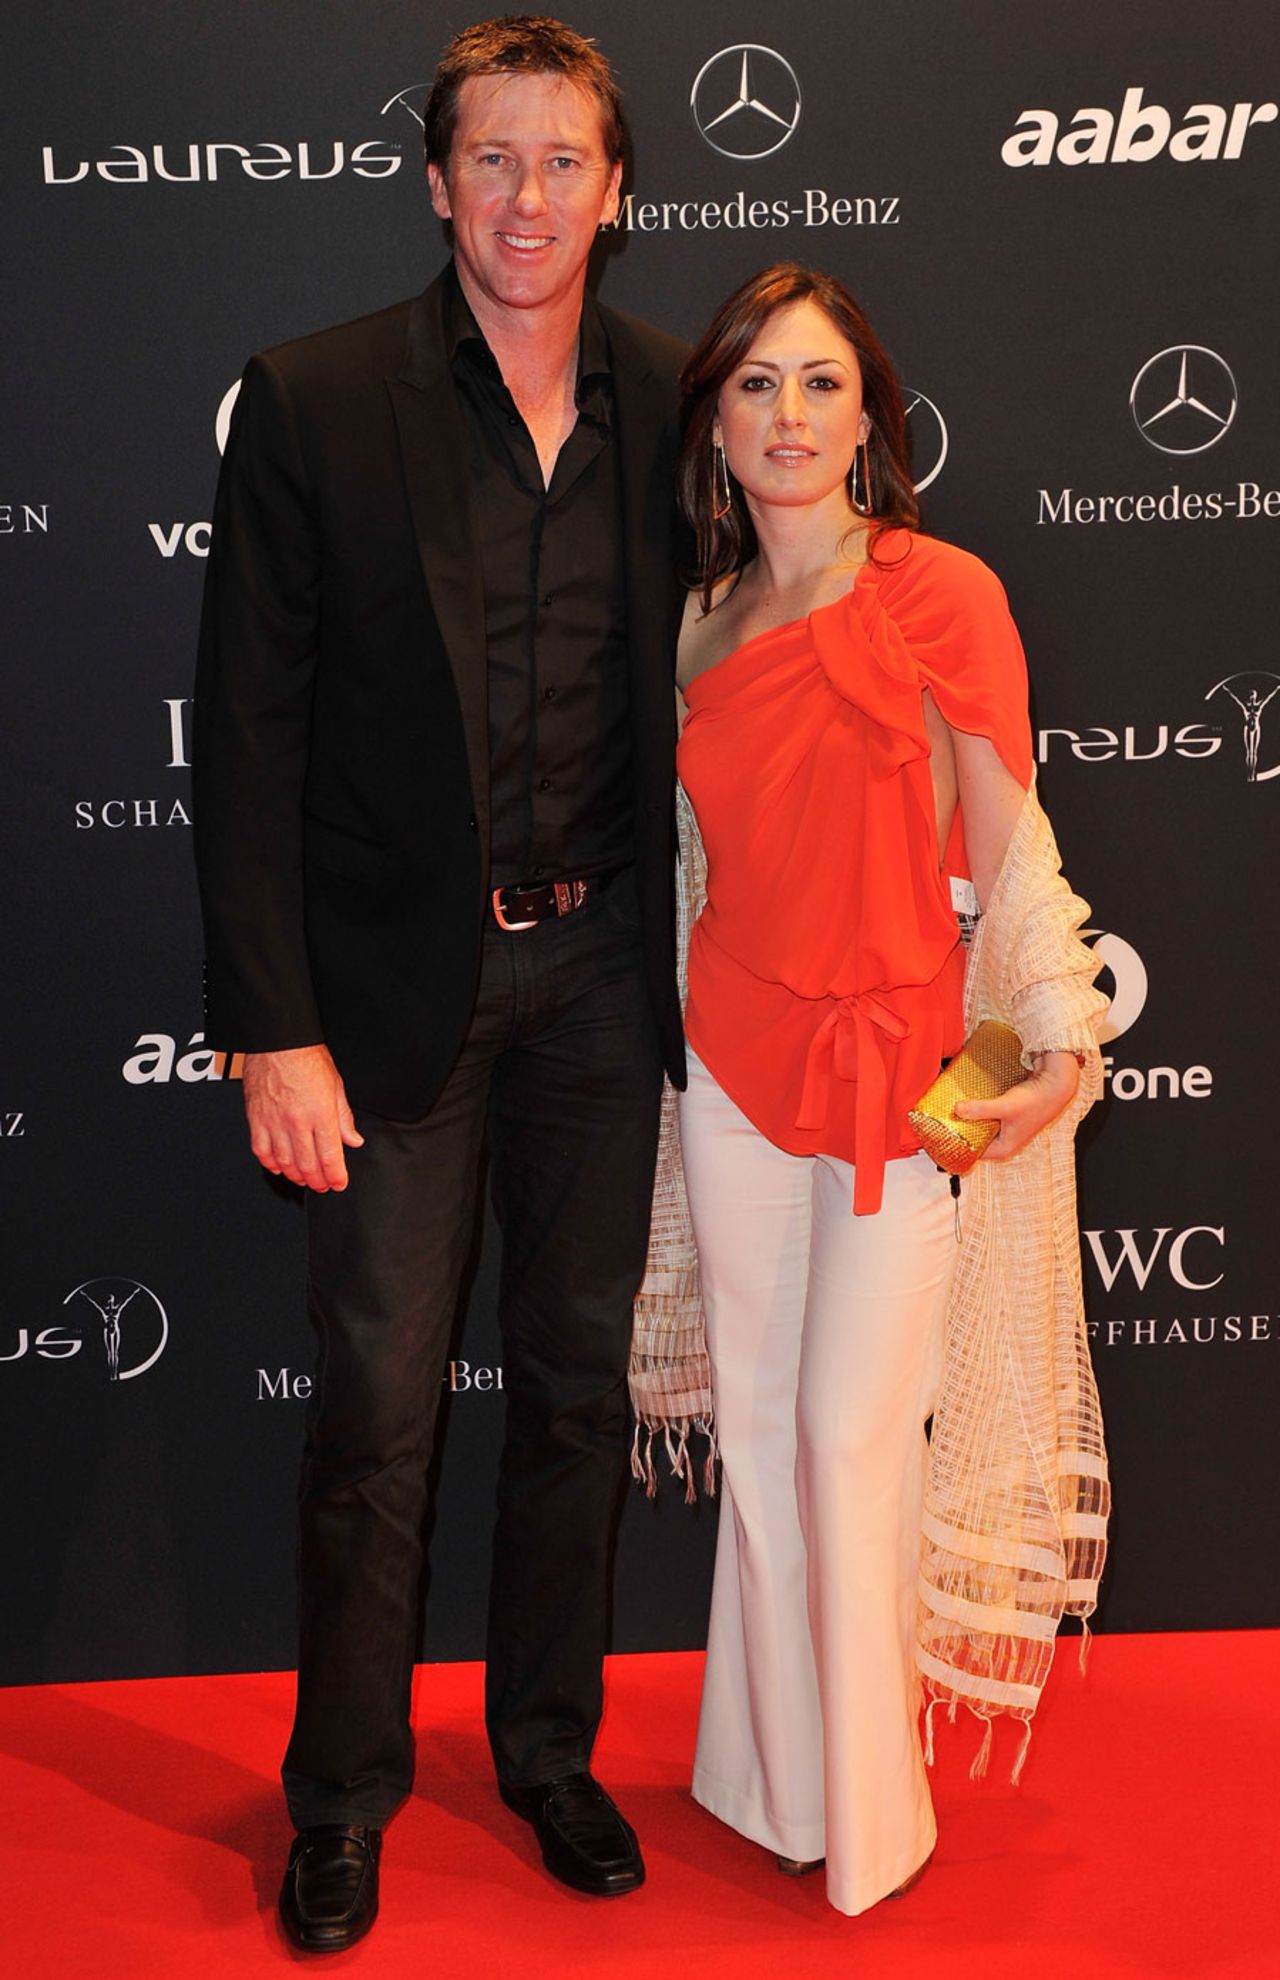 Glenn McGrath poses with his wife at the welcome party for the Laureus sports awards, Abu Dhabi, February 6, 2011